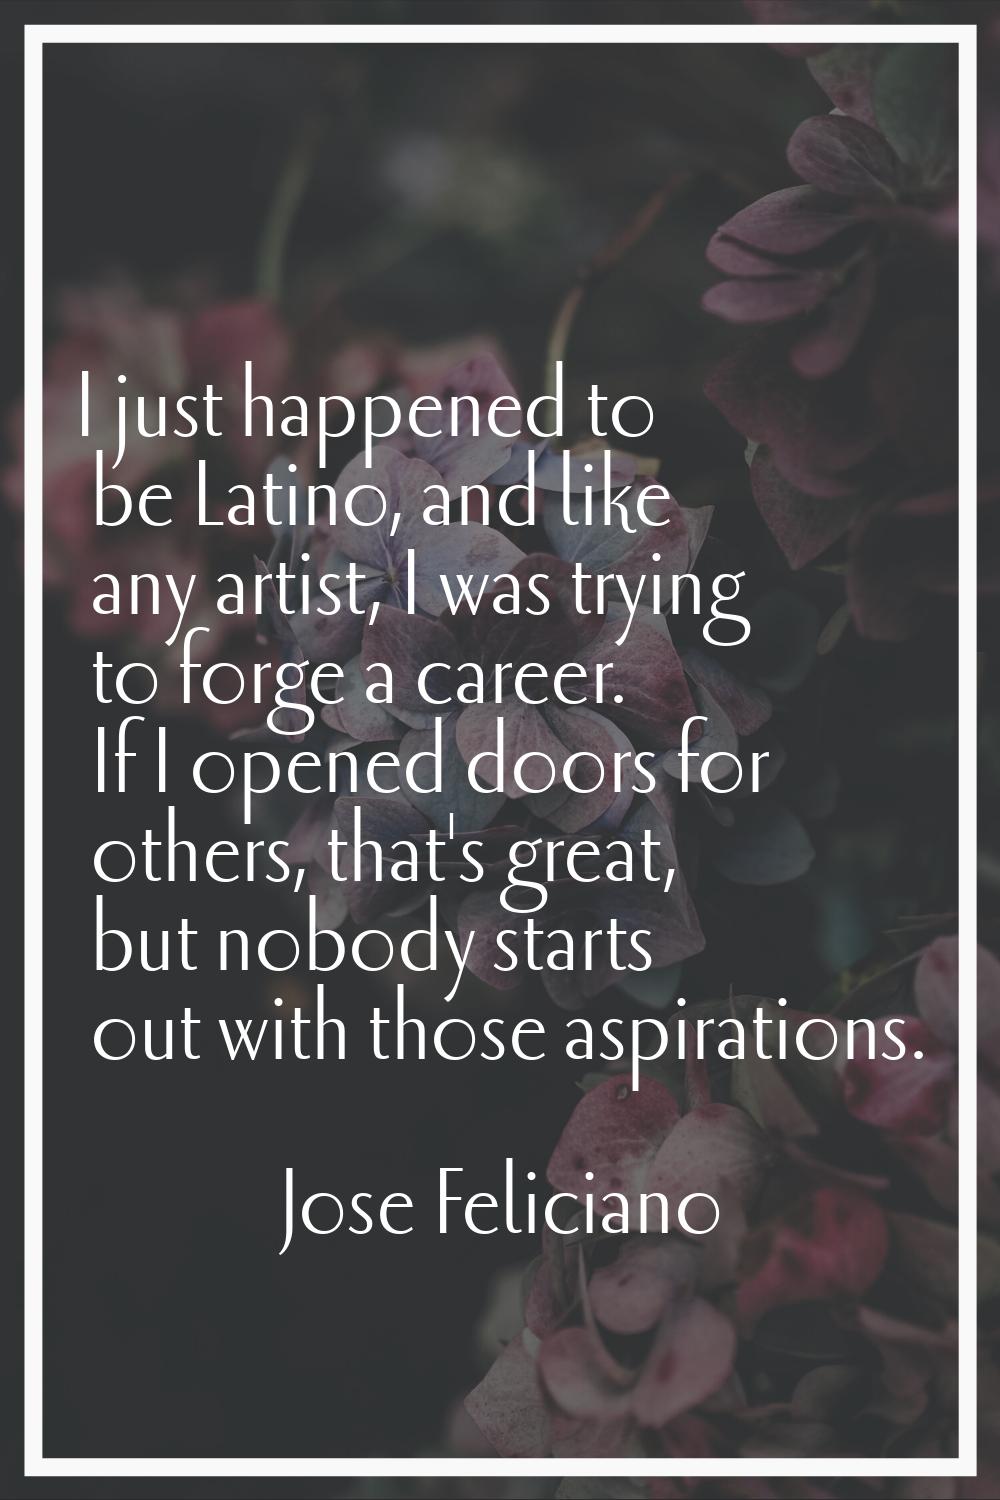 I just happened to be Latino, and like any artist, I was trying to forge a career. If I opened door